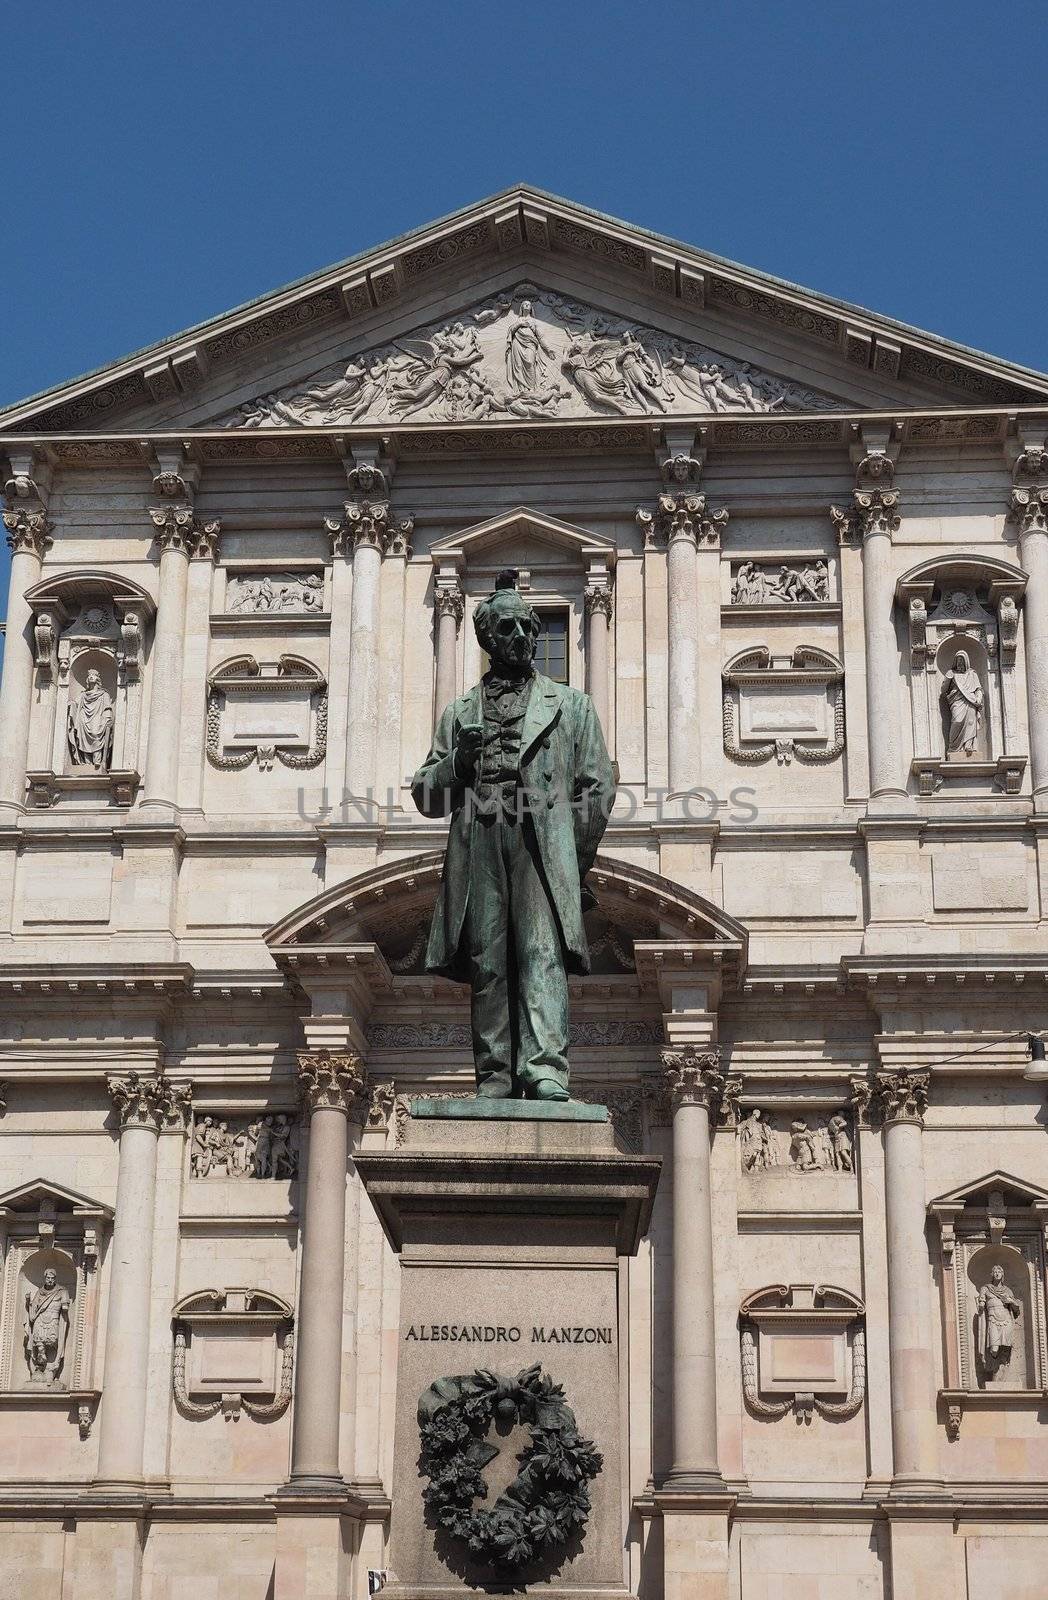 MILAN, ITALY - CIRCA APRIL 2018: Statue of writer Alessandro Manzoni in front of San Fedele church